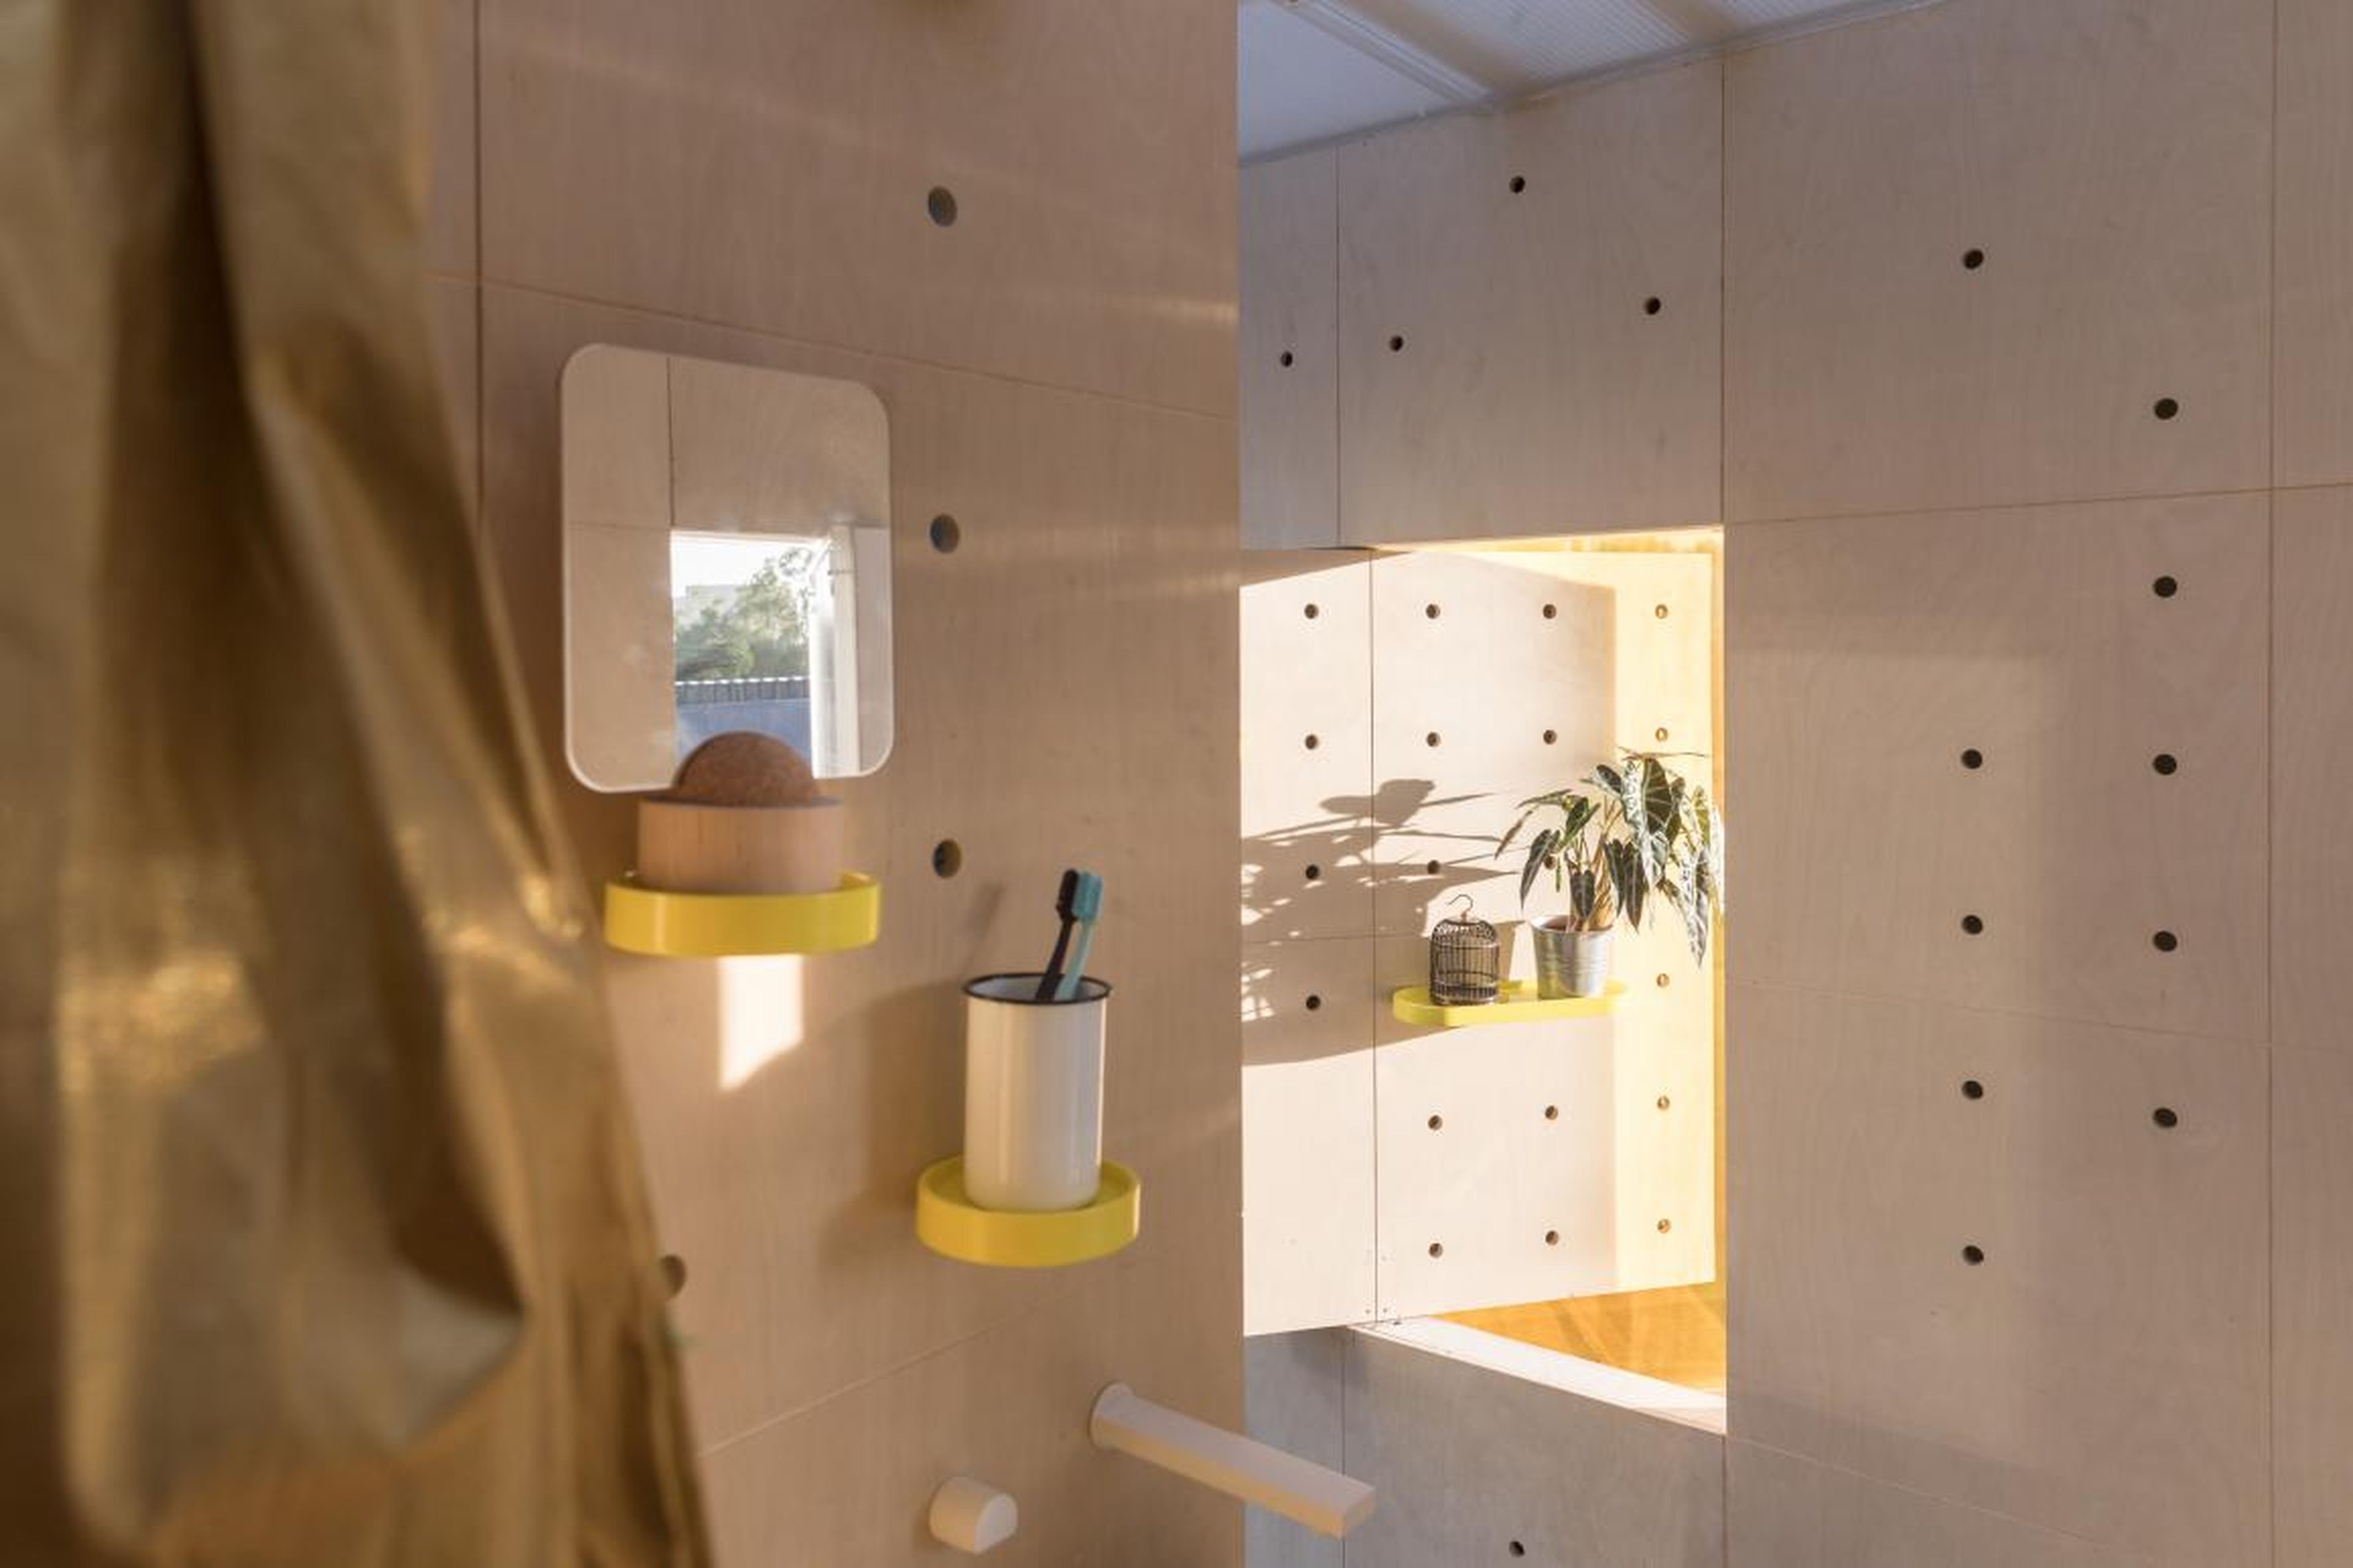 Pegboard walls allow residents to customize their shelf space.